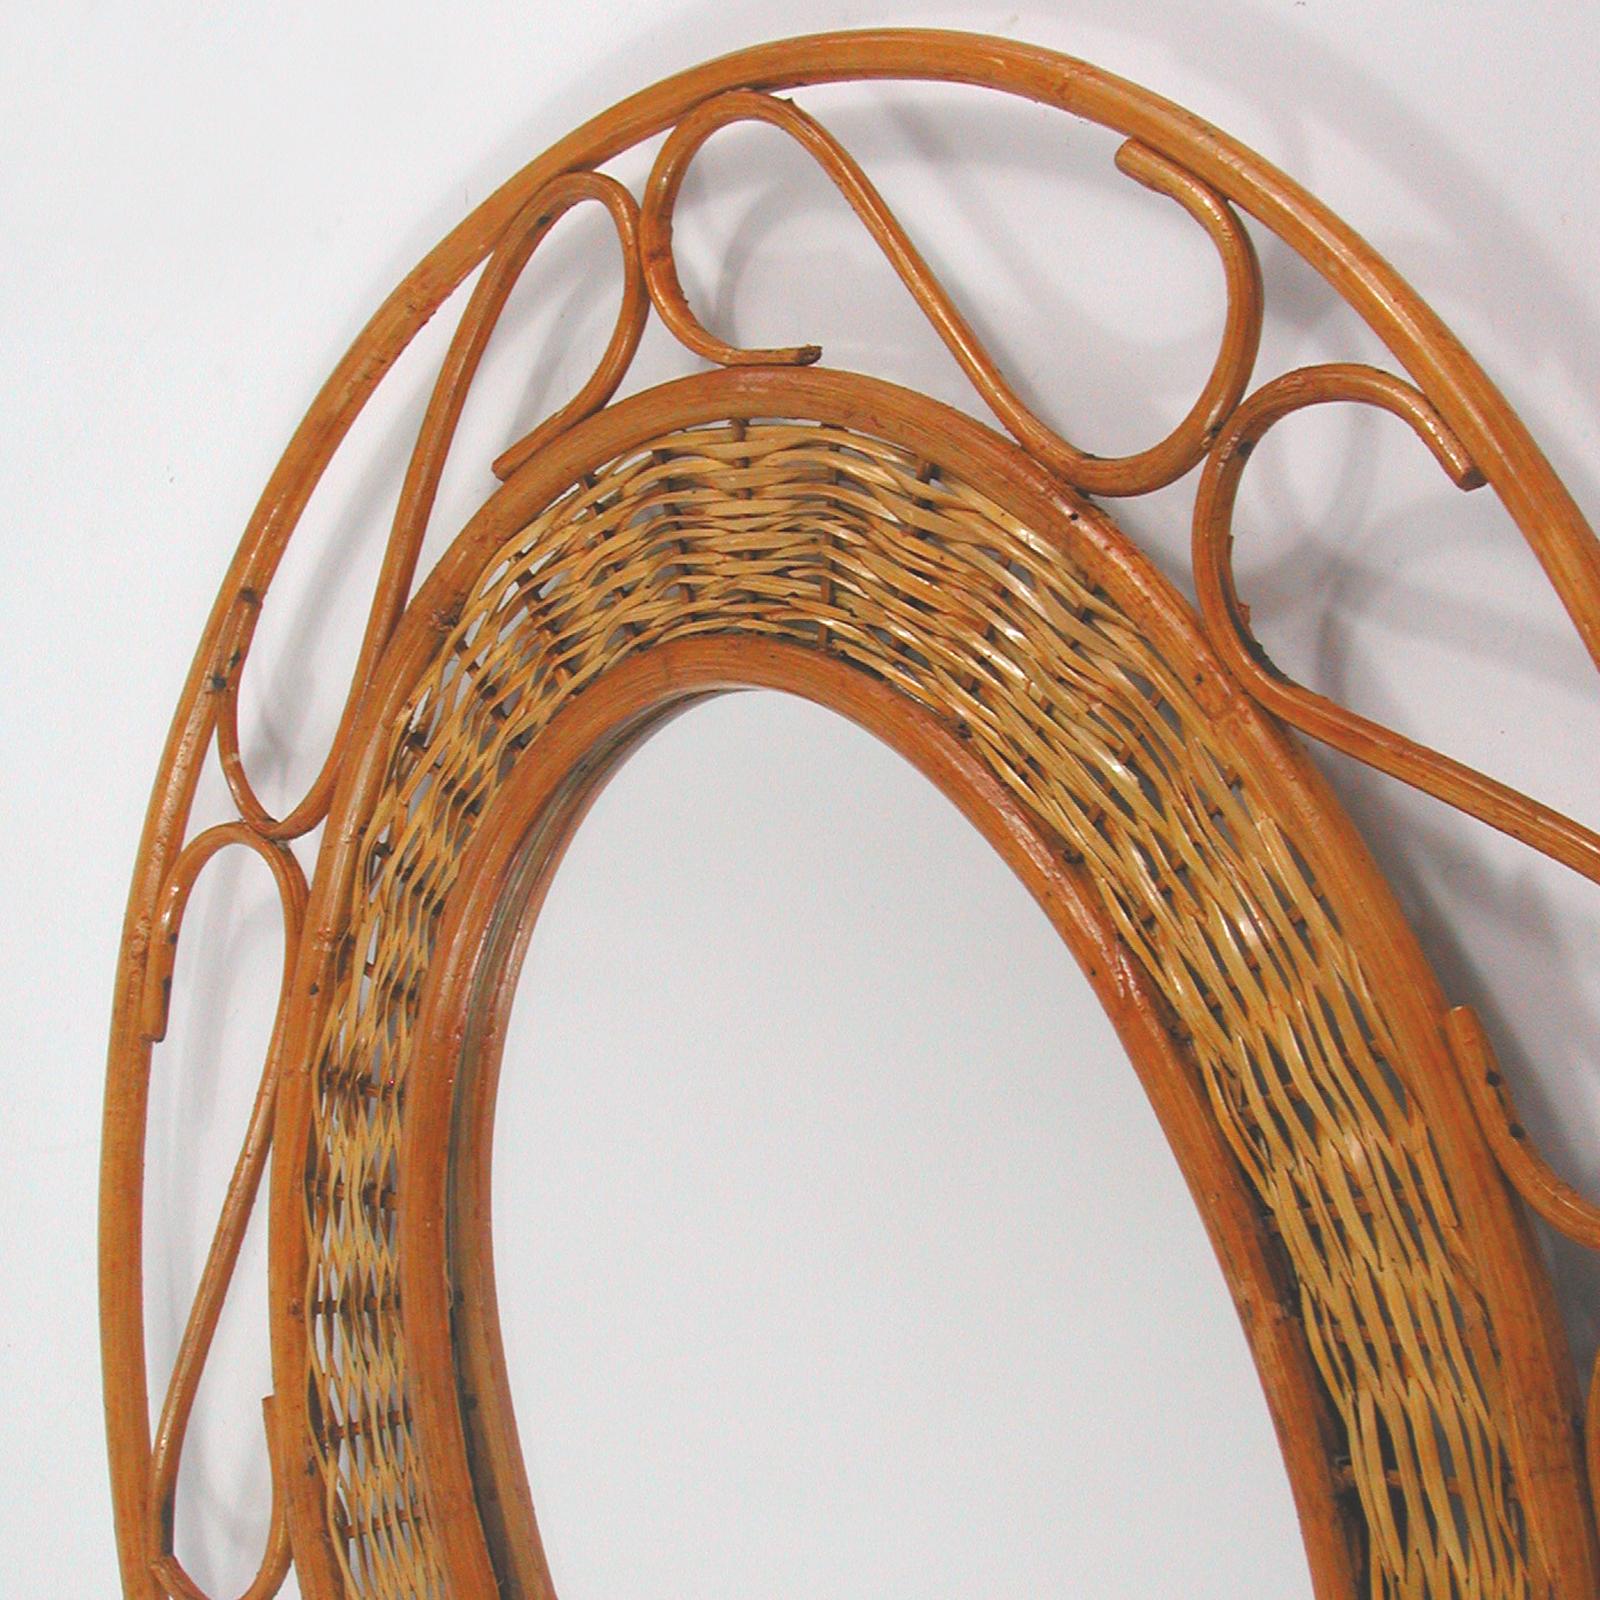 Midcentury Jean Royère Style French Riviera Rattan and Wicker Mirror, 1950s For Sale 2